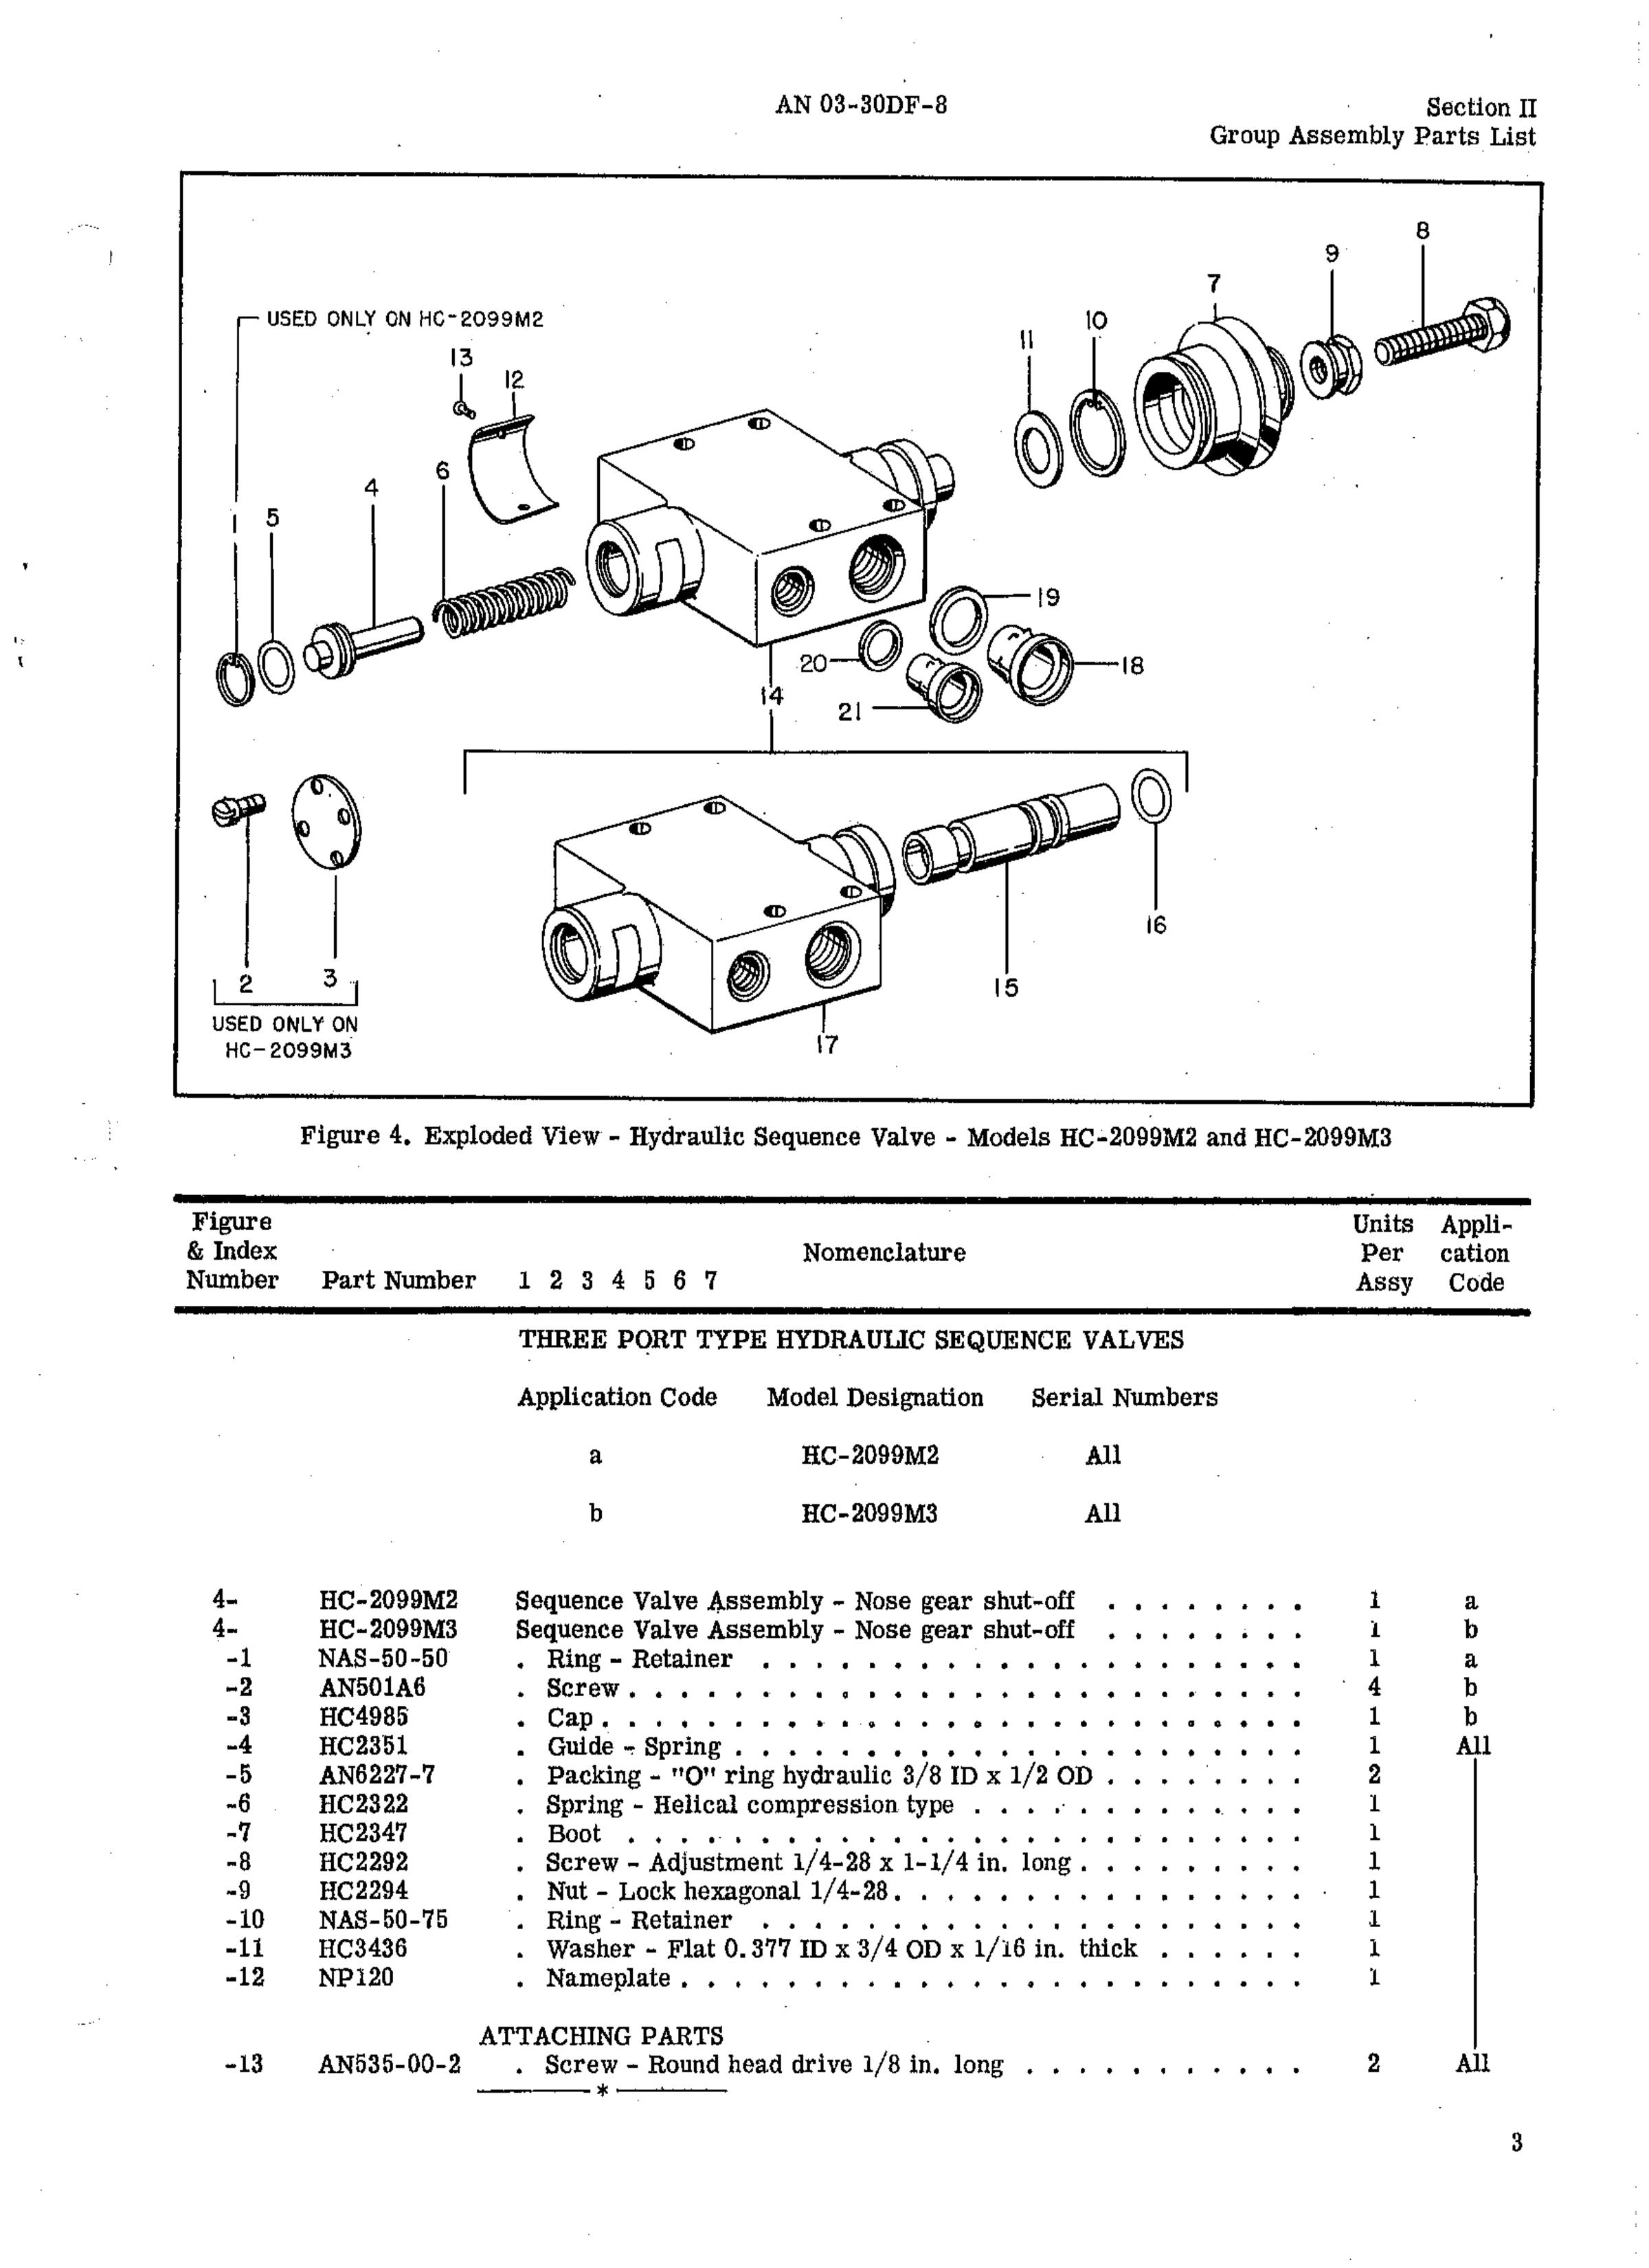 Sample page 5 from AirCorps Library document: Parts Catalog for Hydraulic Sequence Valves